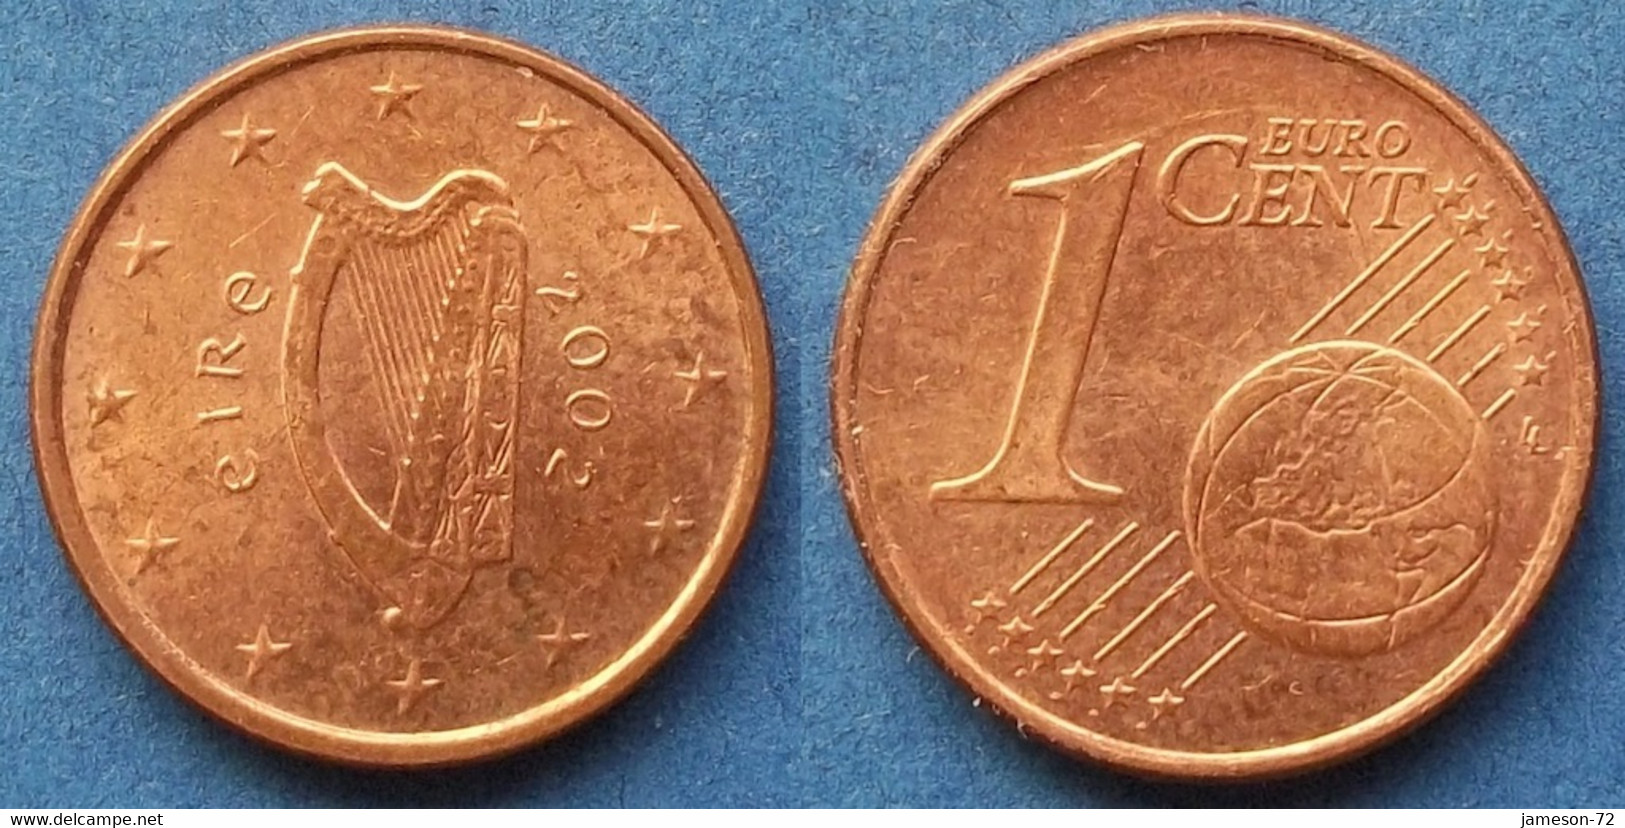 IRELAND - 1 Euro Cent 2002 KM# 32 Euro Coinage (2002) - Edelweiss Coins - Irland